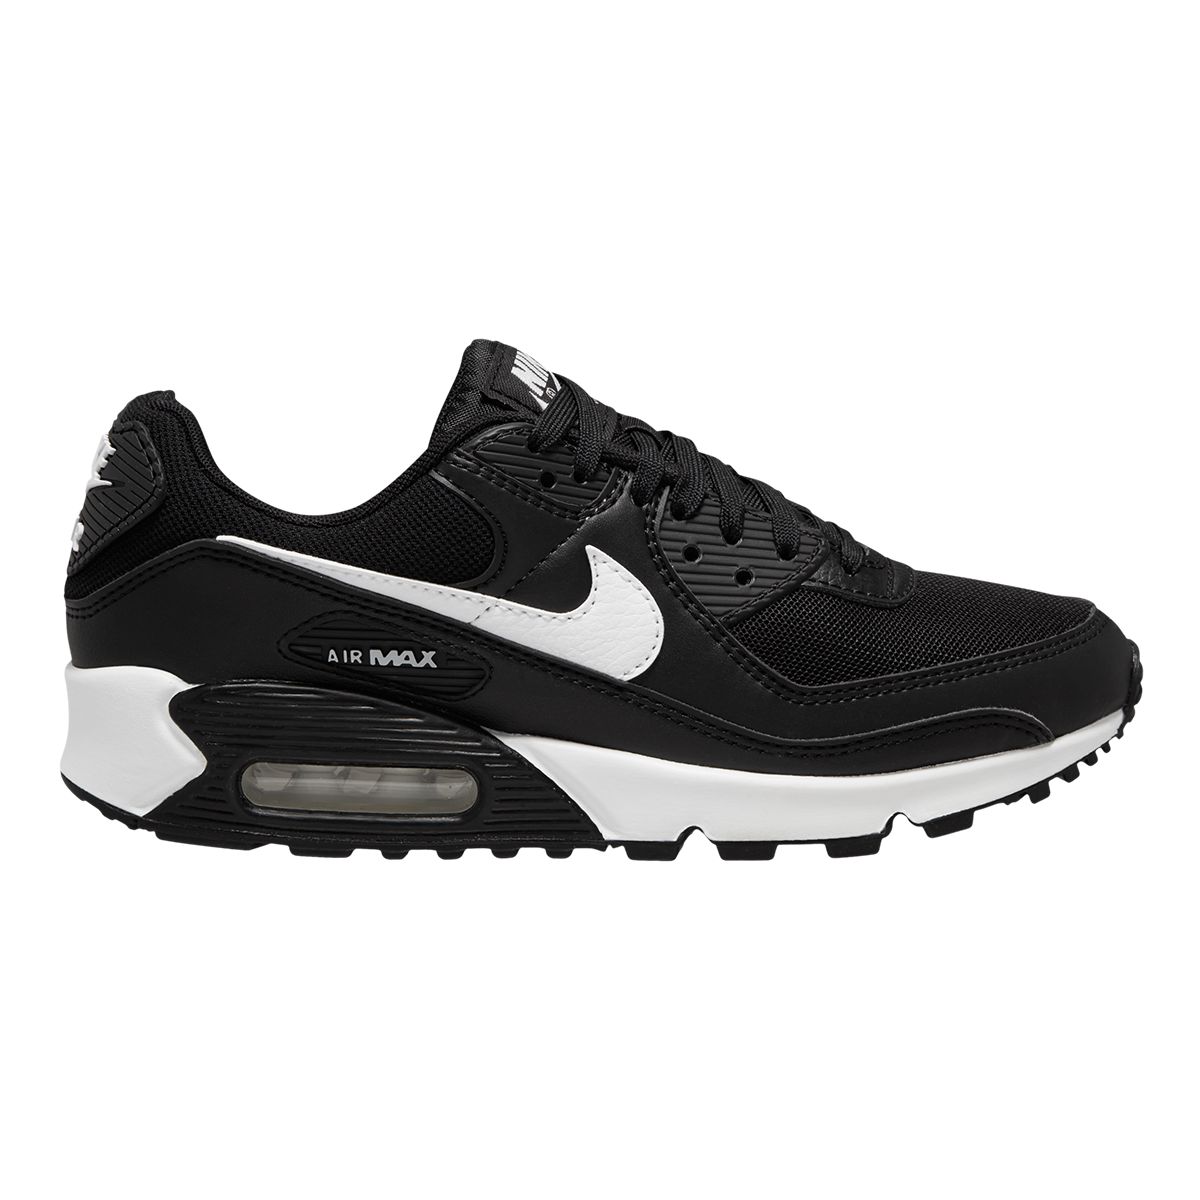 Nike Women's Air Max 90 Shoes, Sneakers, Low Top, Cushioned